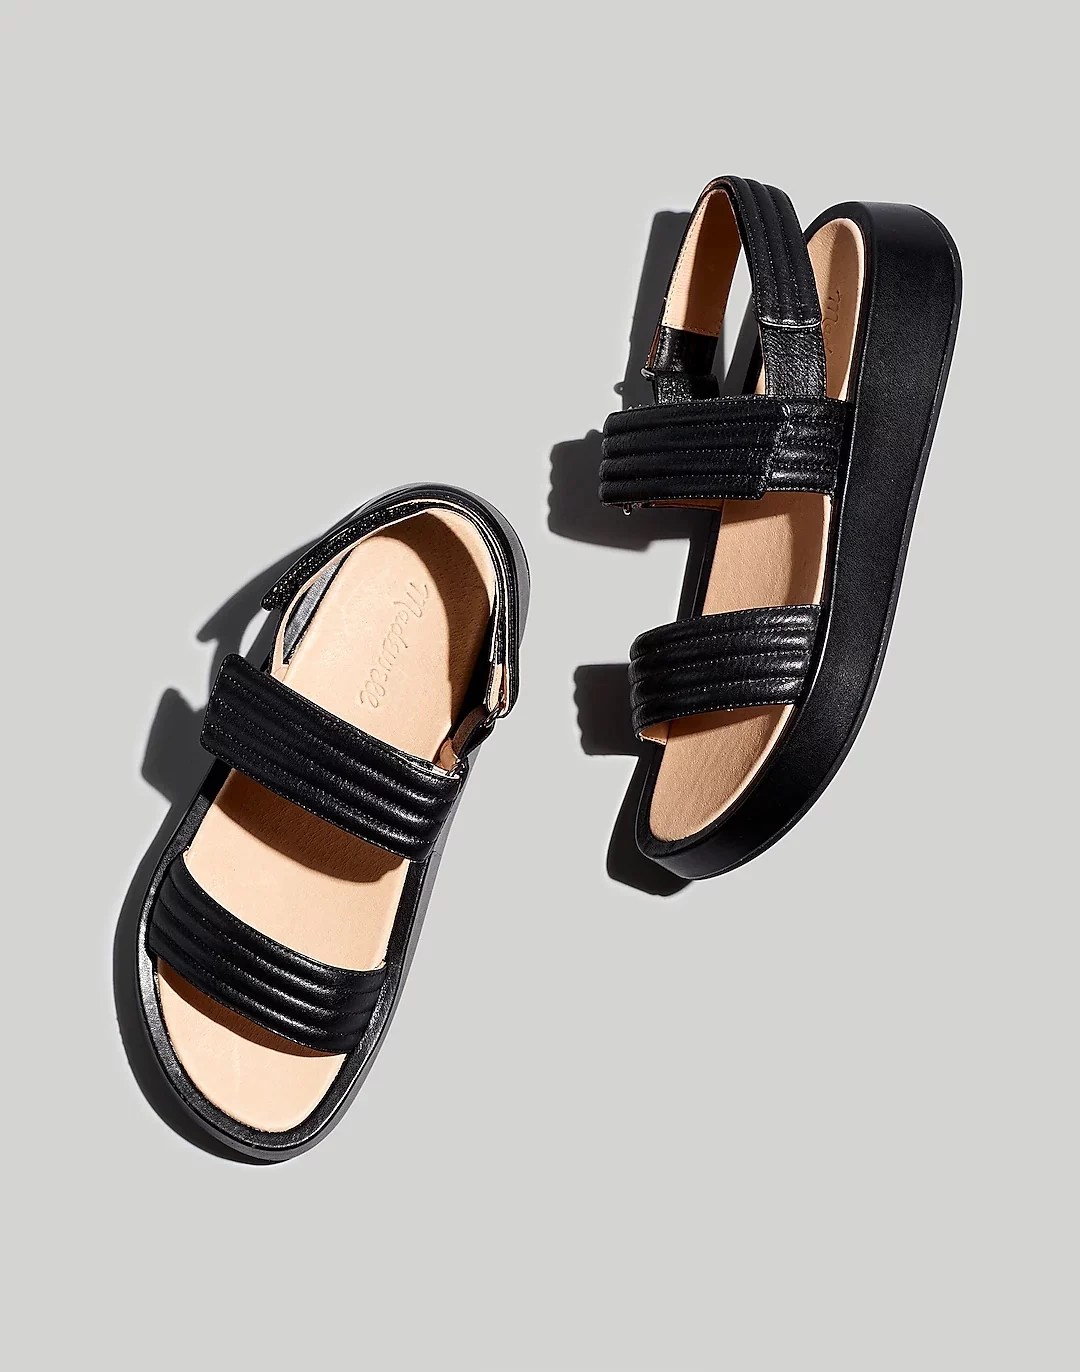 Madewell, The Emmalee Sandal, sandals for wide feet